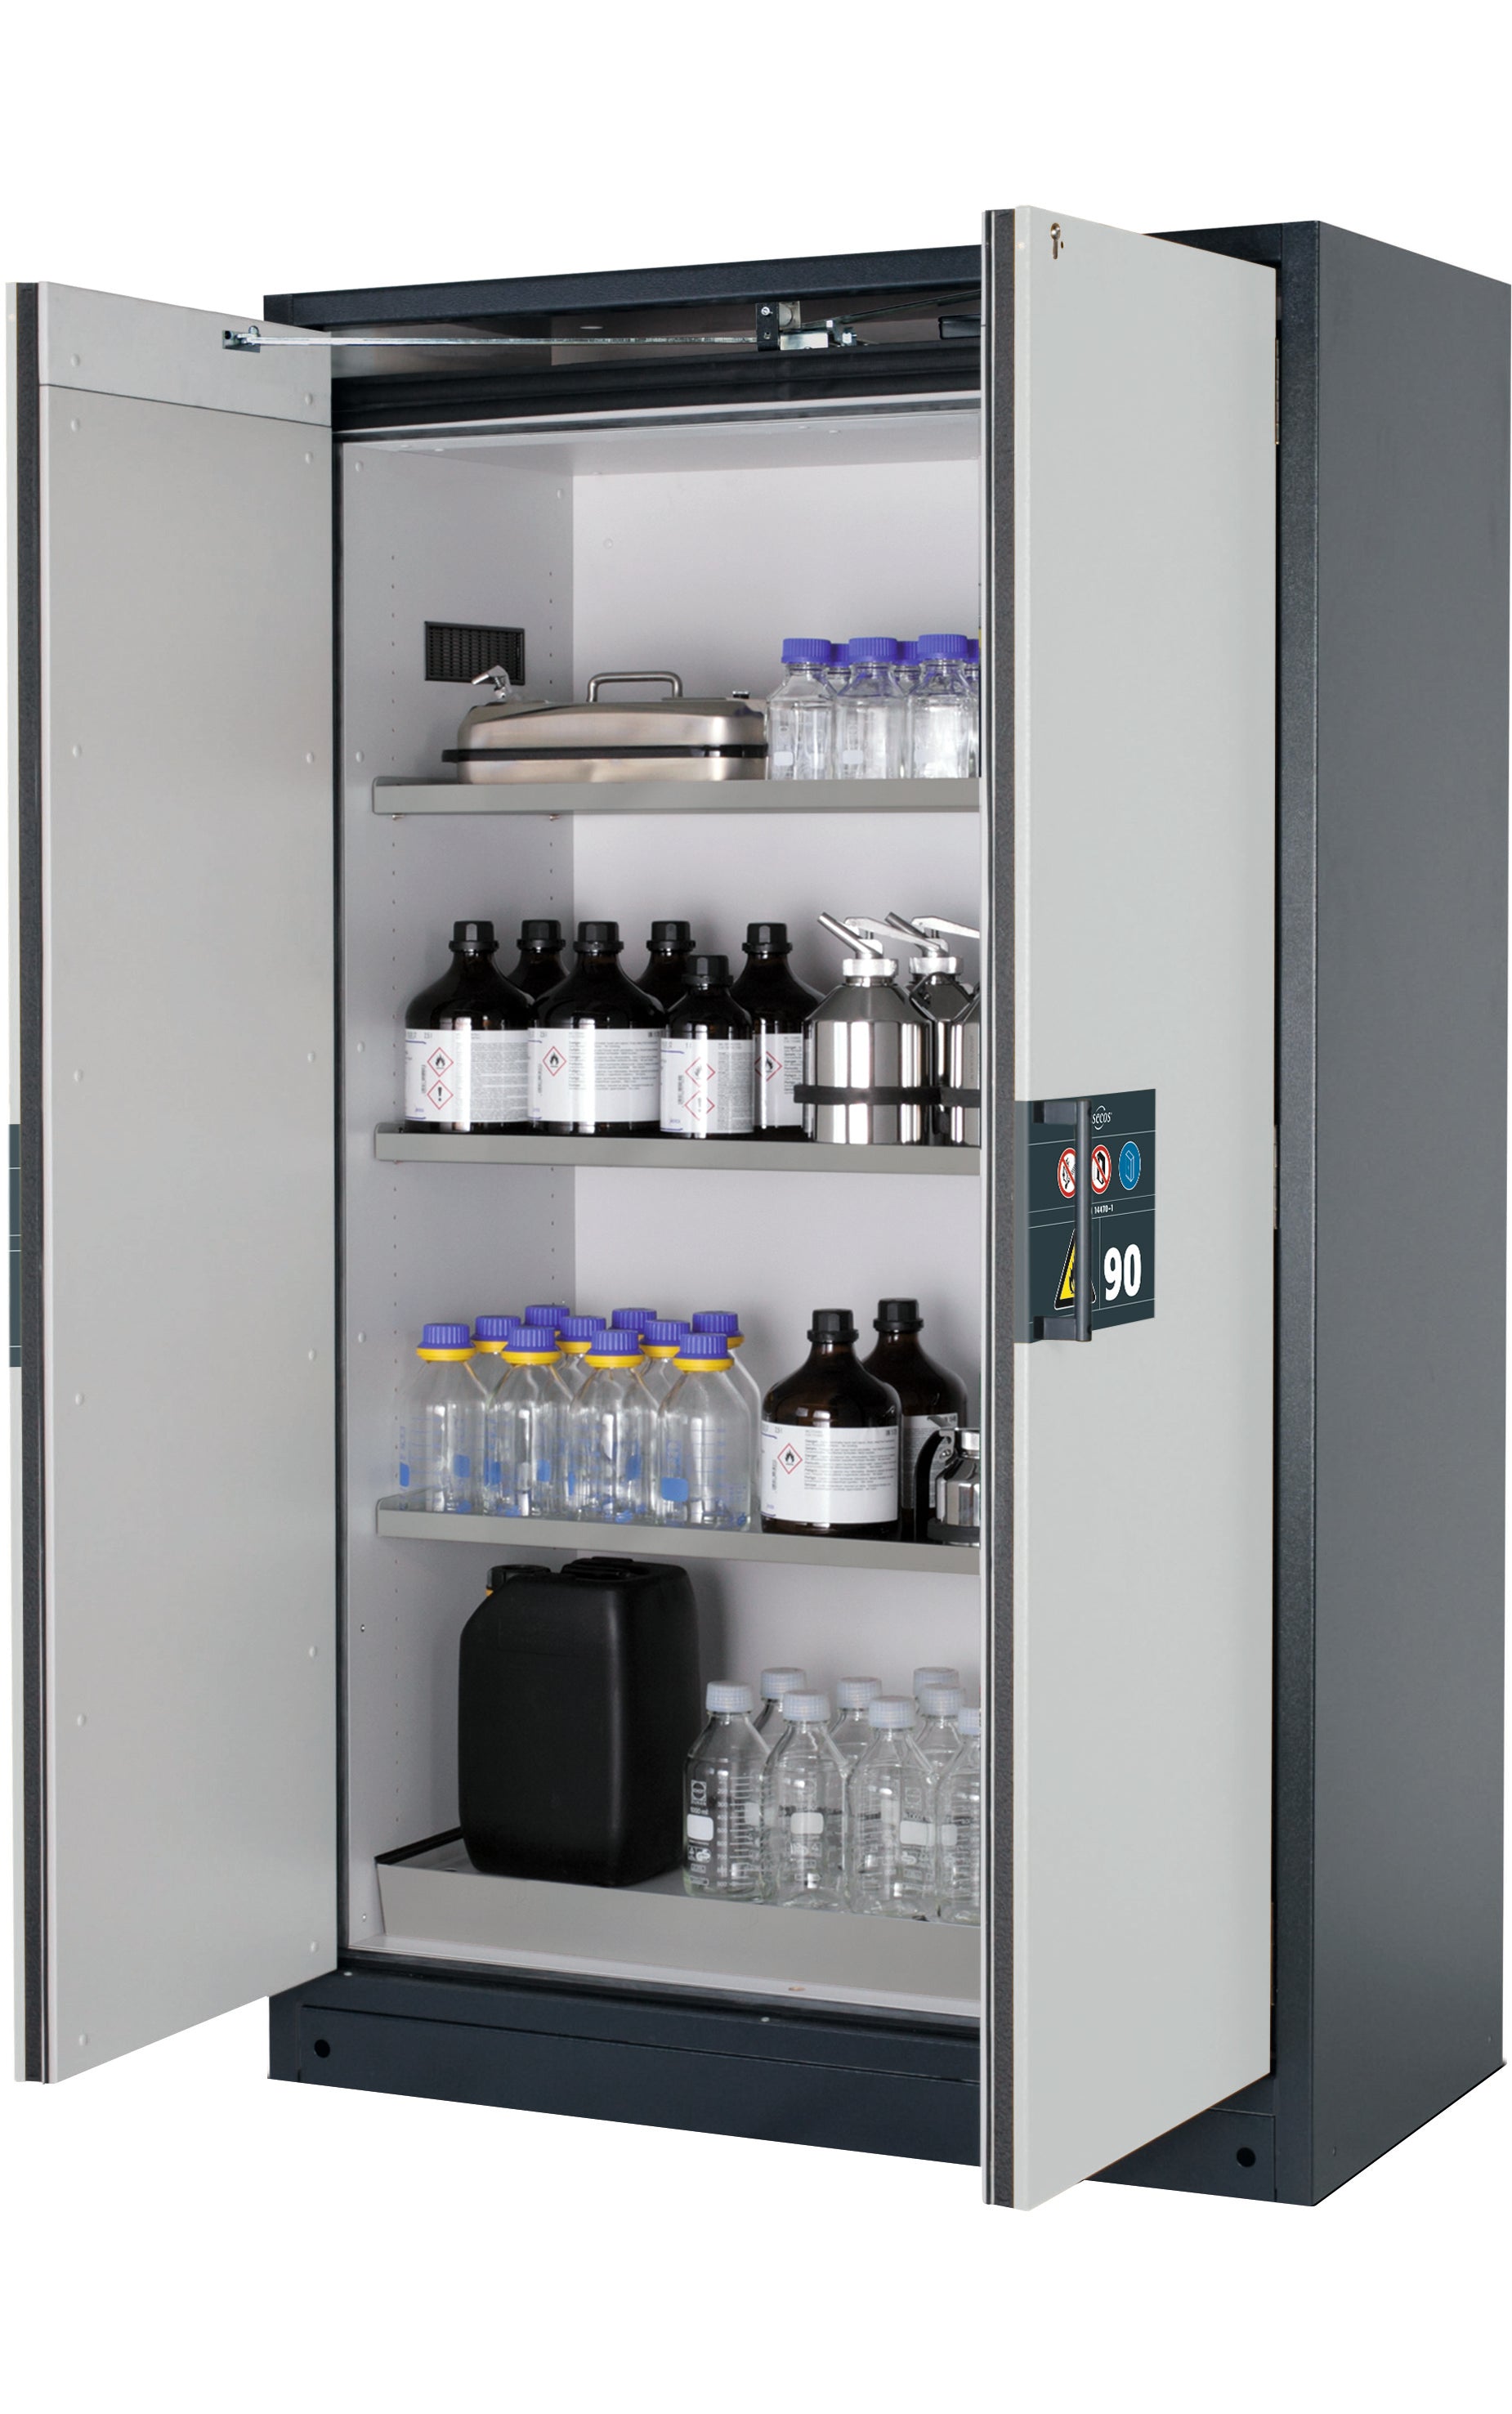 Type 90 safety storage cabinet Q-PEGASUS-90 model Q90.195.120.WDAC in light grey RAL 7035 with 3x shelf standard (stainless steel 1.4301),